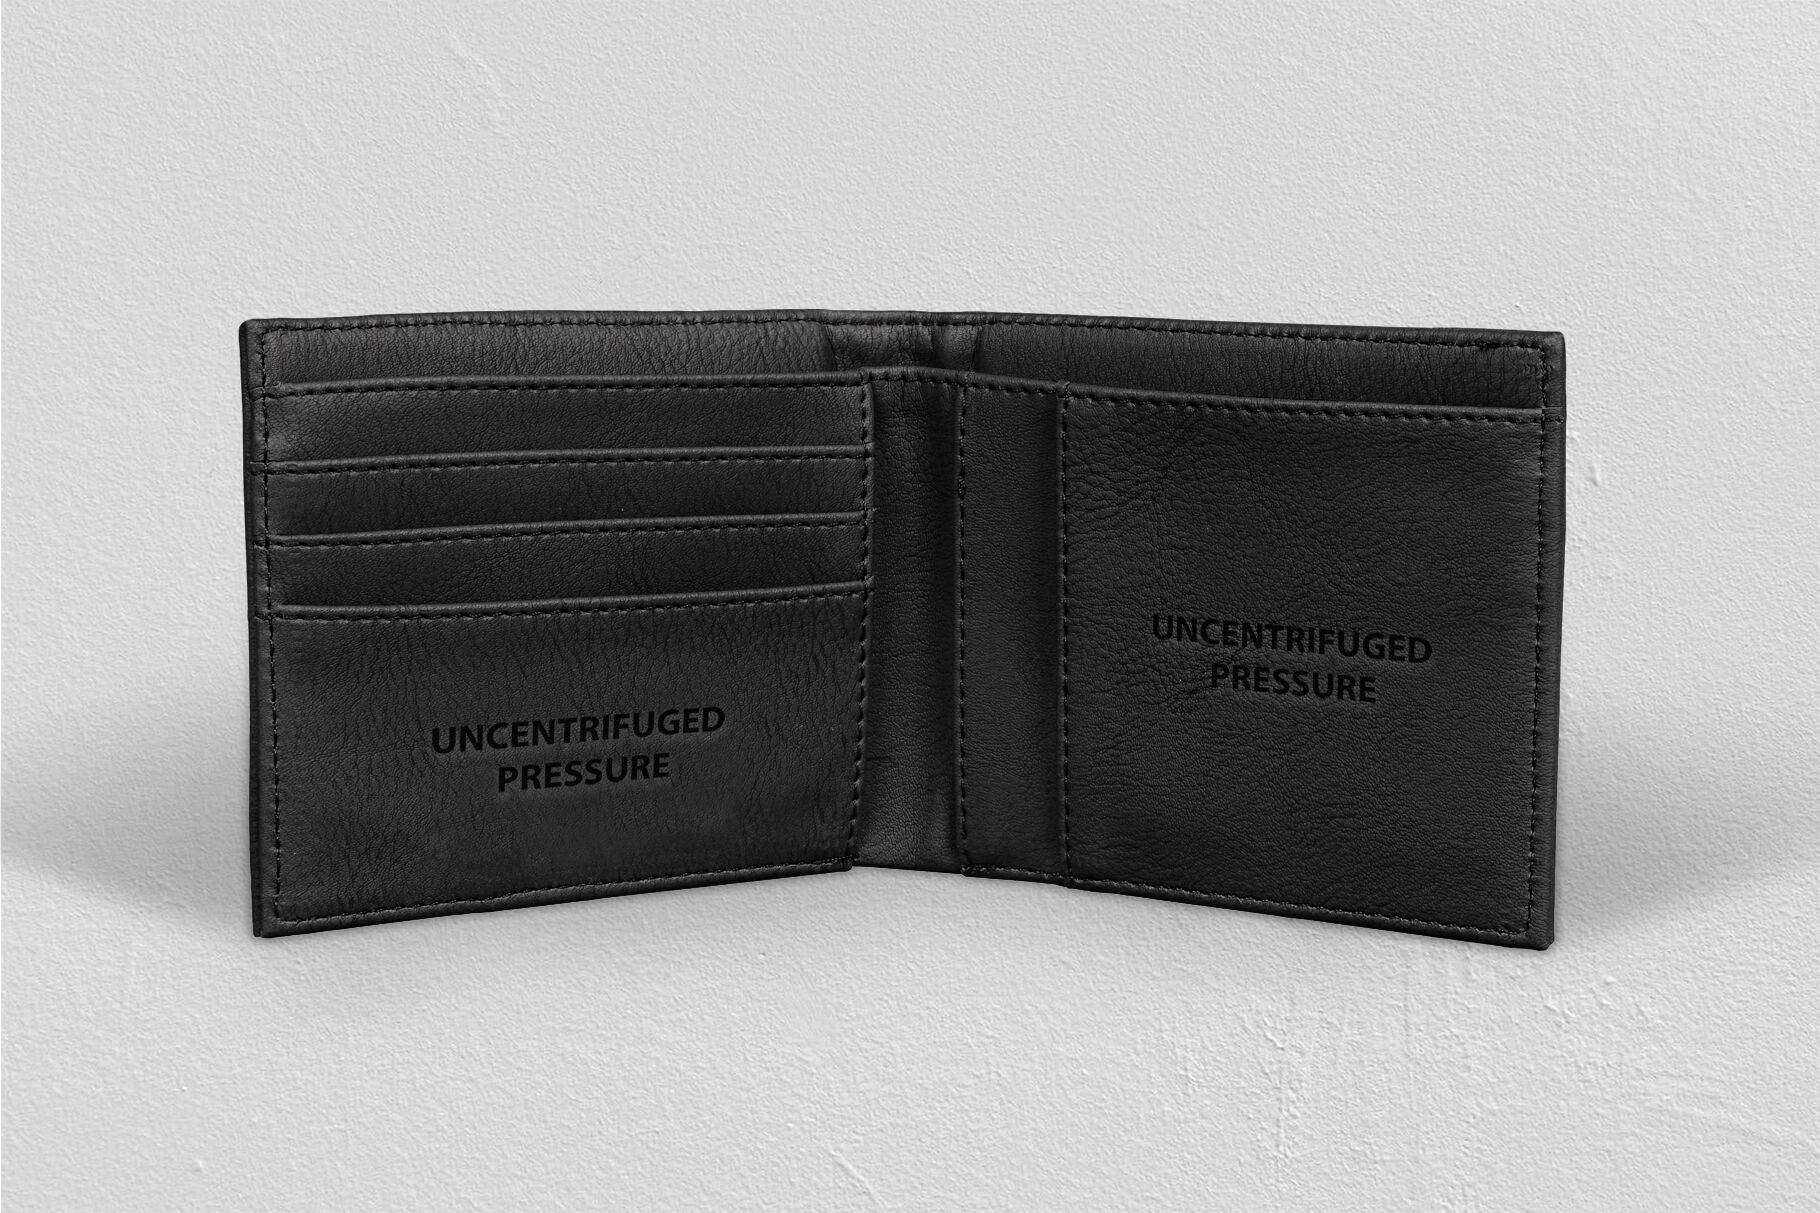 Download Leather Wallet Mockup By Uncentrifuged Pressure ...